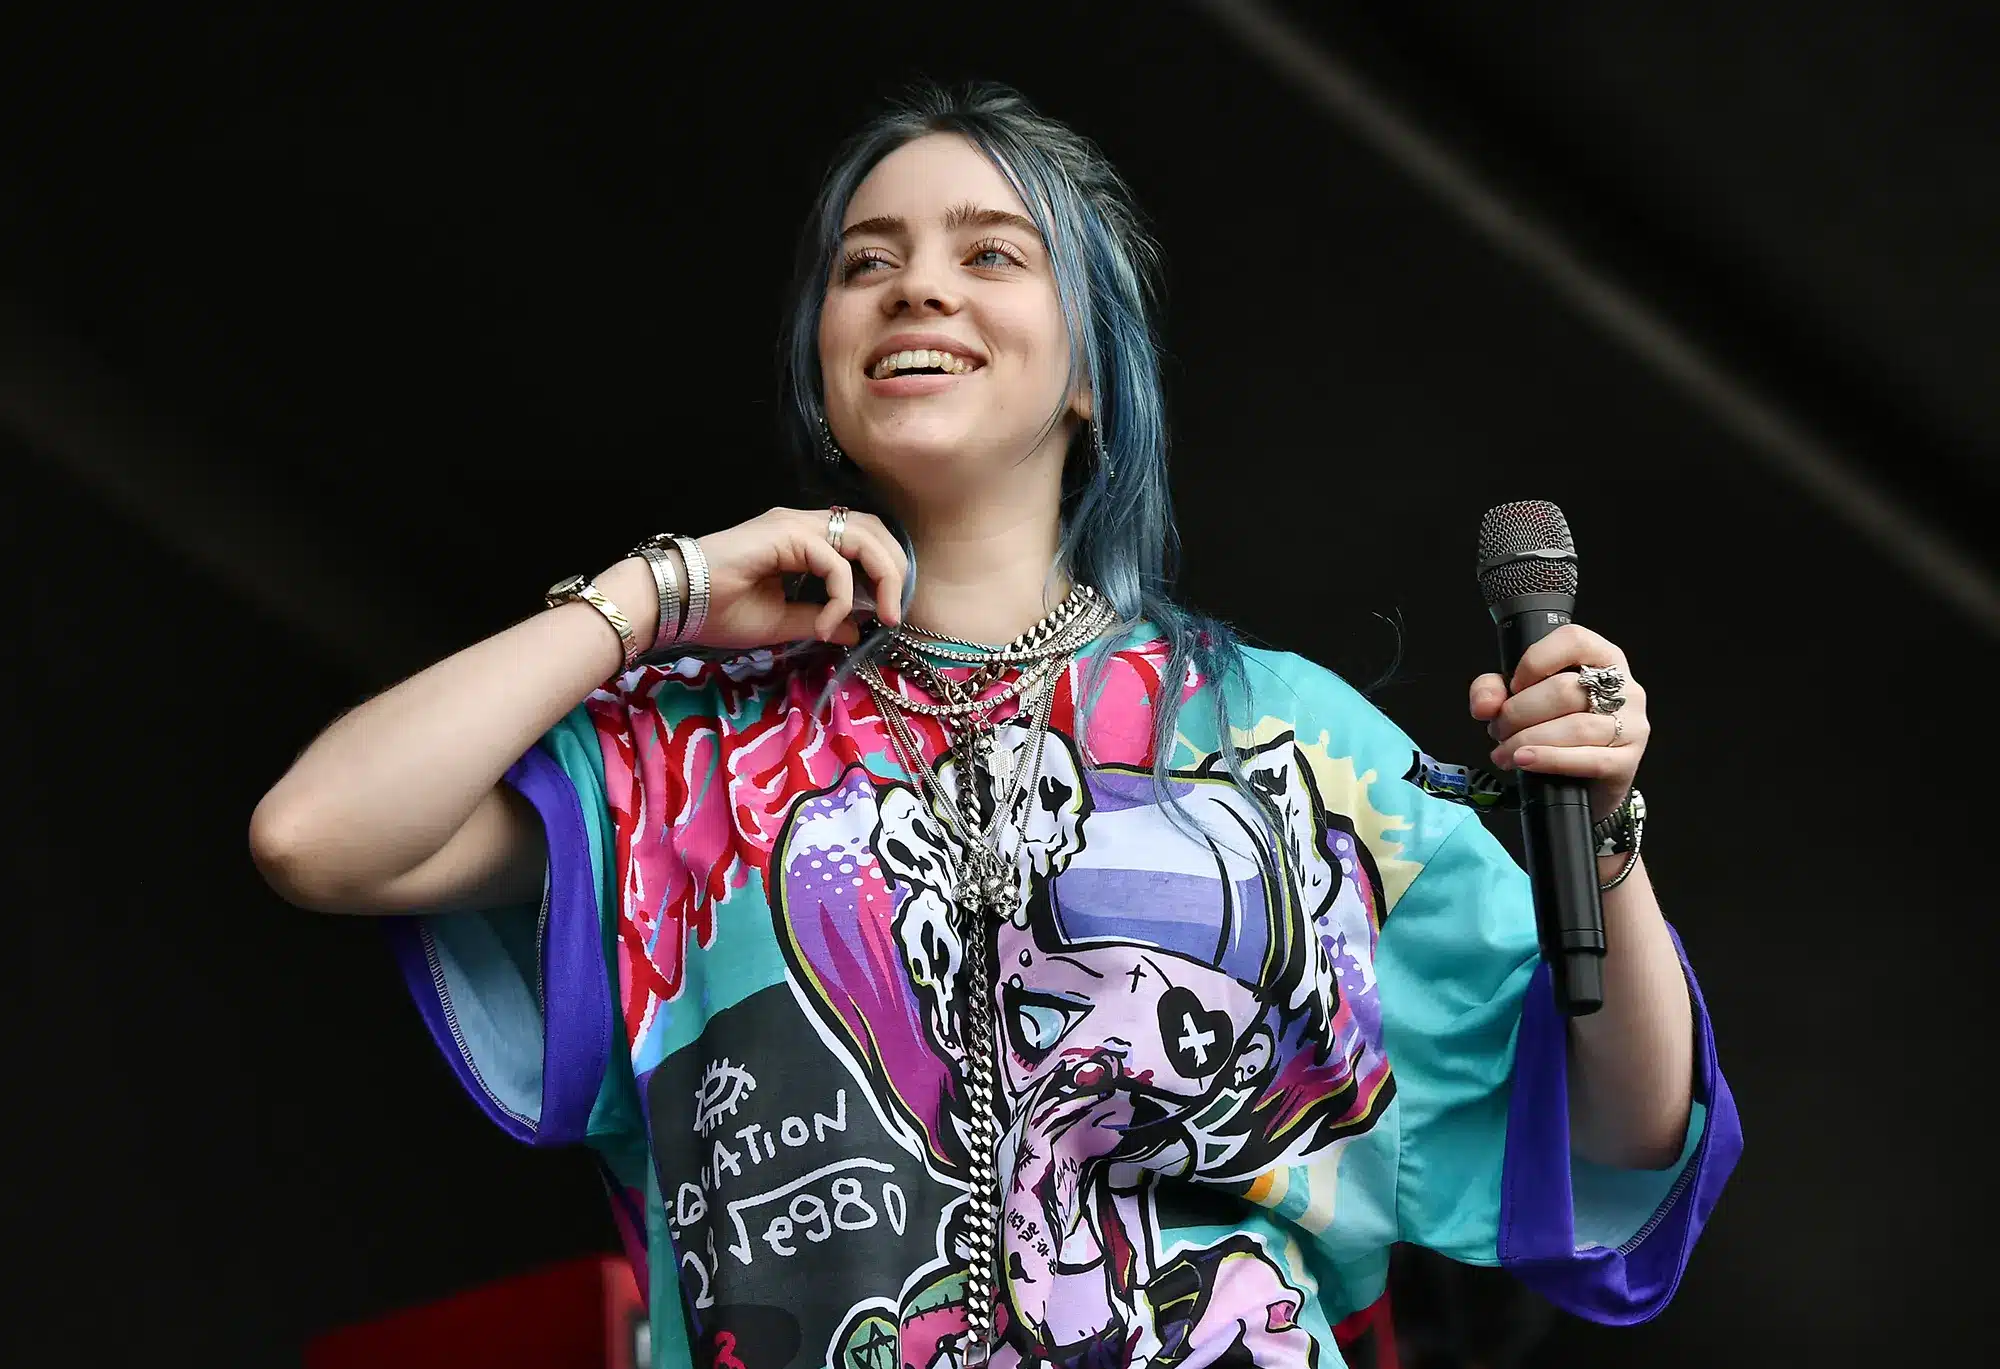 Why I have 1,993 unread texts on my phone – American singer Billie Eilish